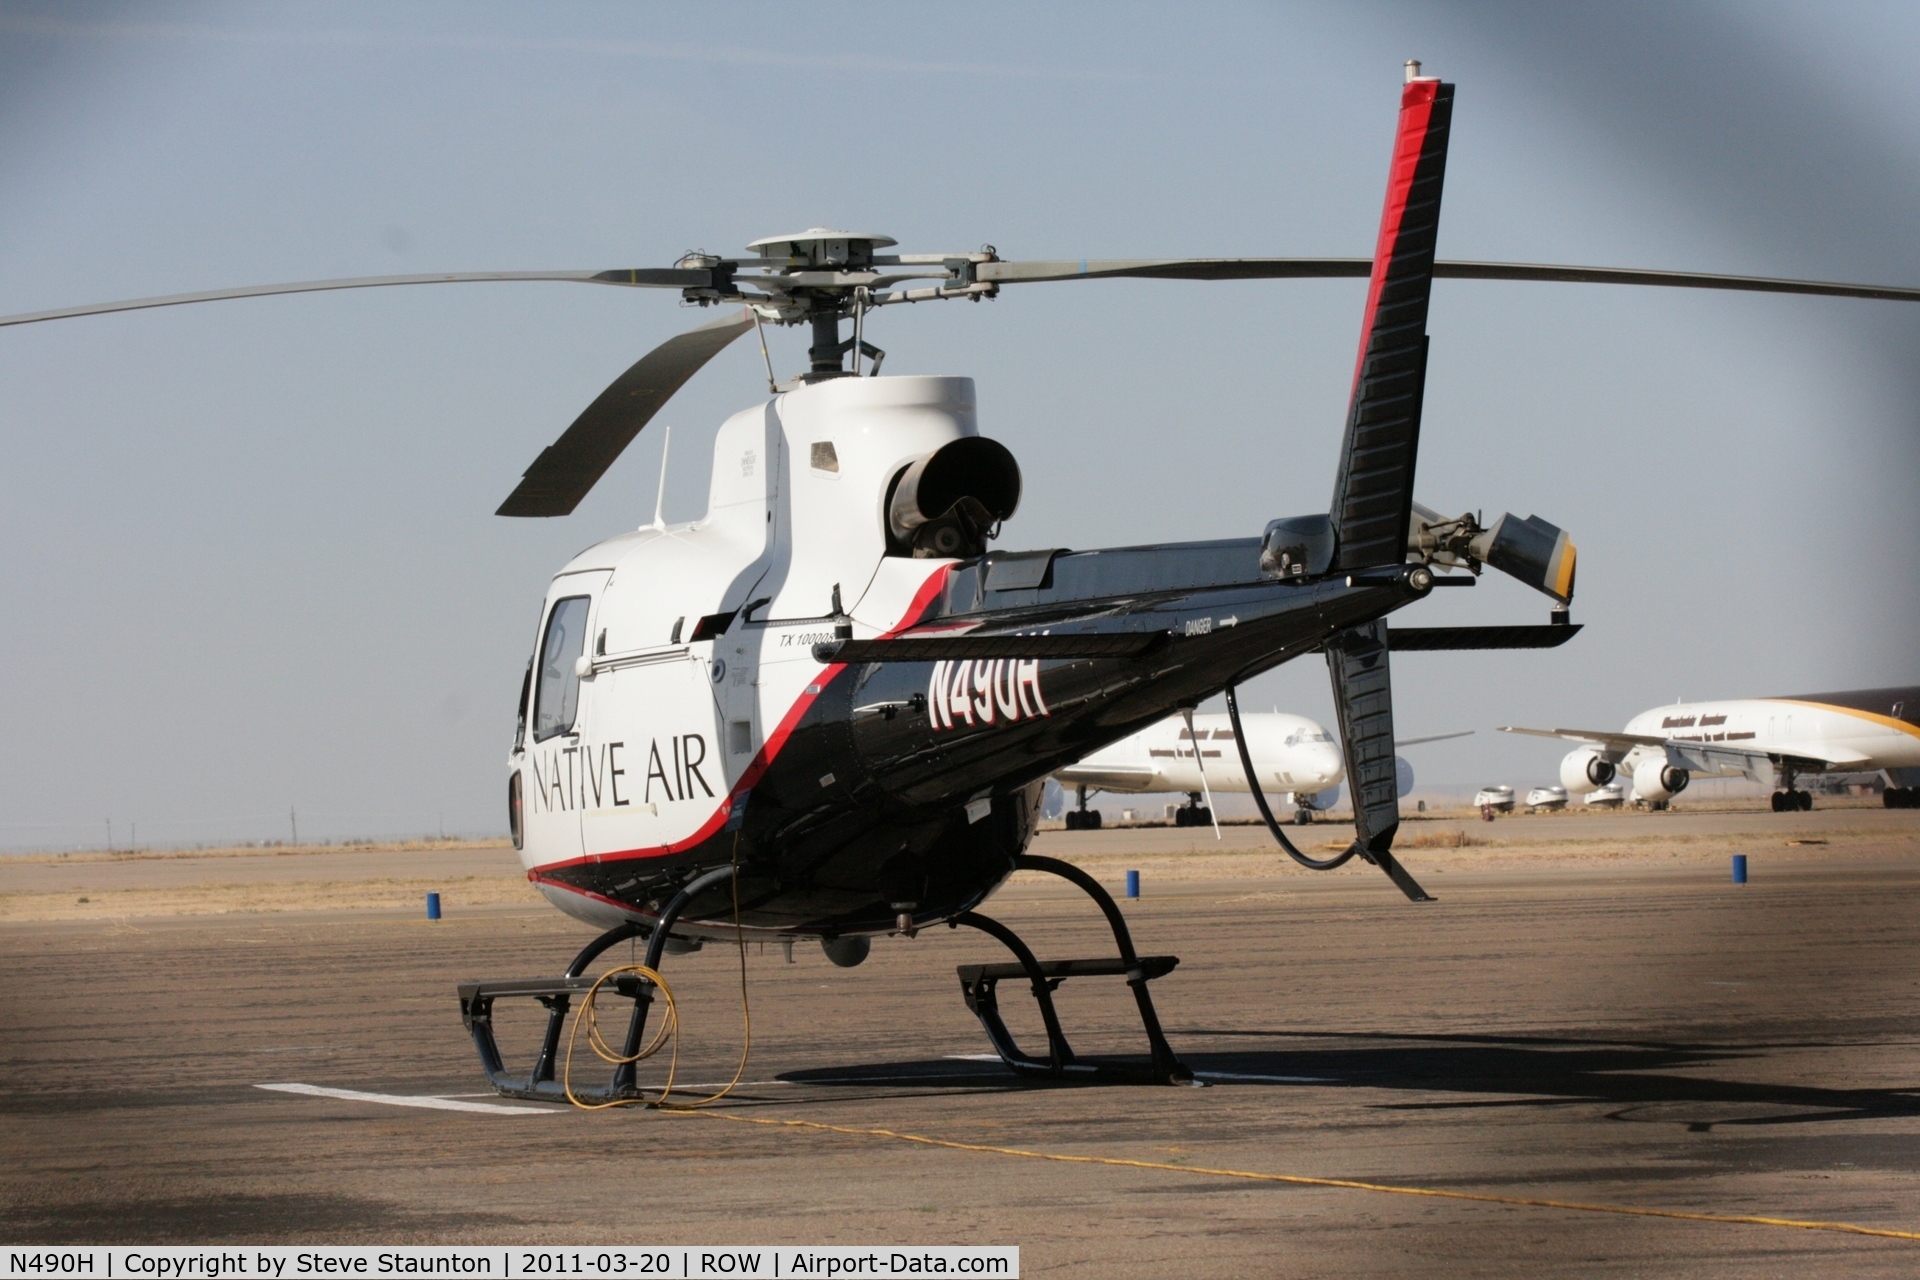 N490H, 2008 Aerospatiale AS-350B-3 Ecureuil C/N 4539, Taken at Roswell International Air Centre Storage Facility, New Mexico in March 2011 whilst on an Aeroprint Aviation tour